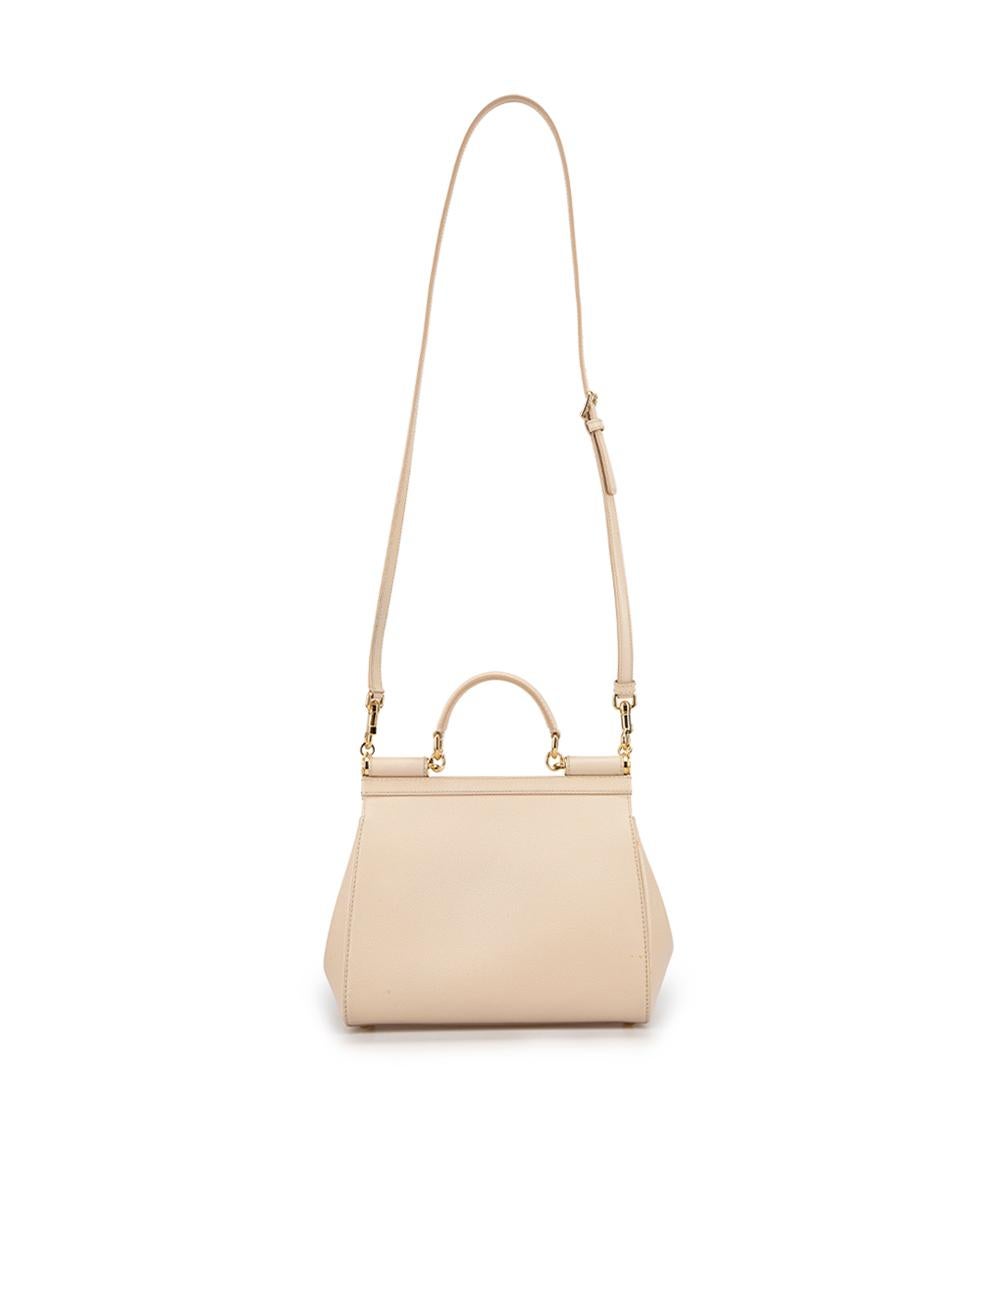 Dolce & Gabbana Beige Leather Sicily Top Handle Bag In Good Condition For Sale In London, GB